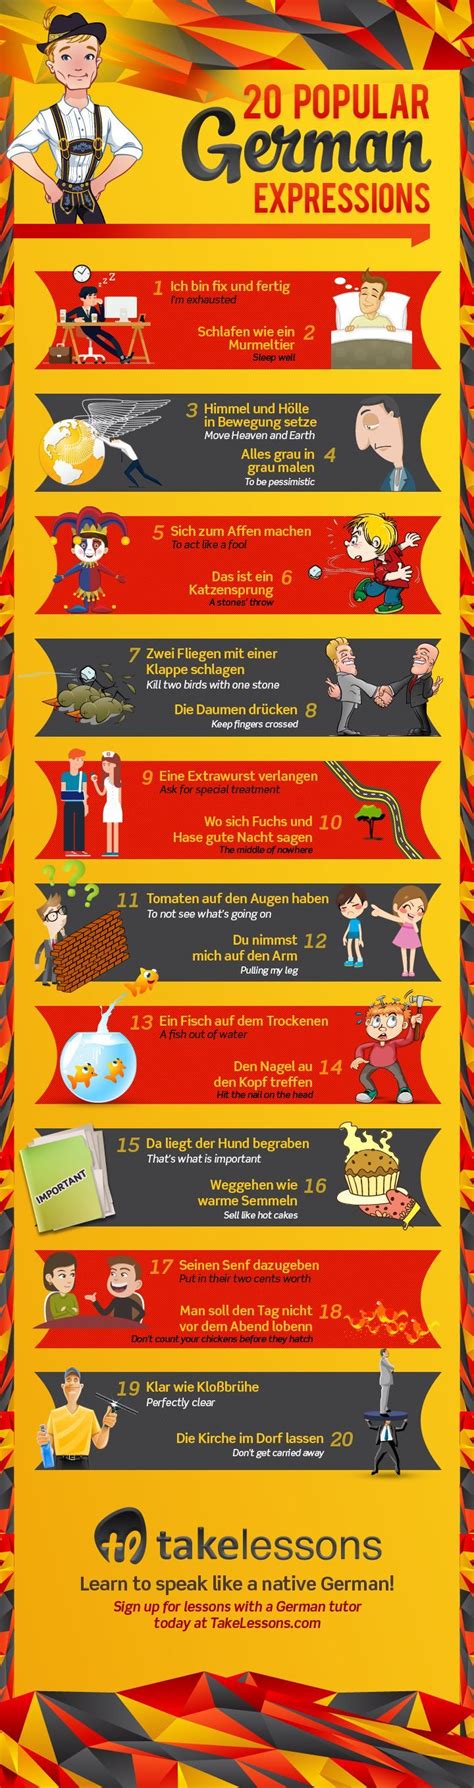 20 Popular German Expressions And What They Mean [infographic